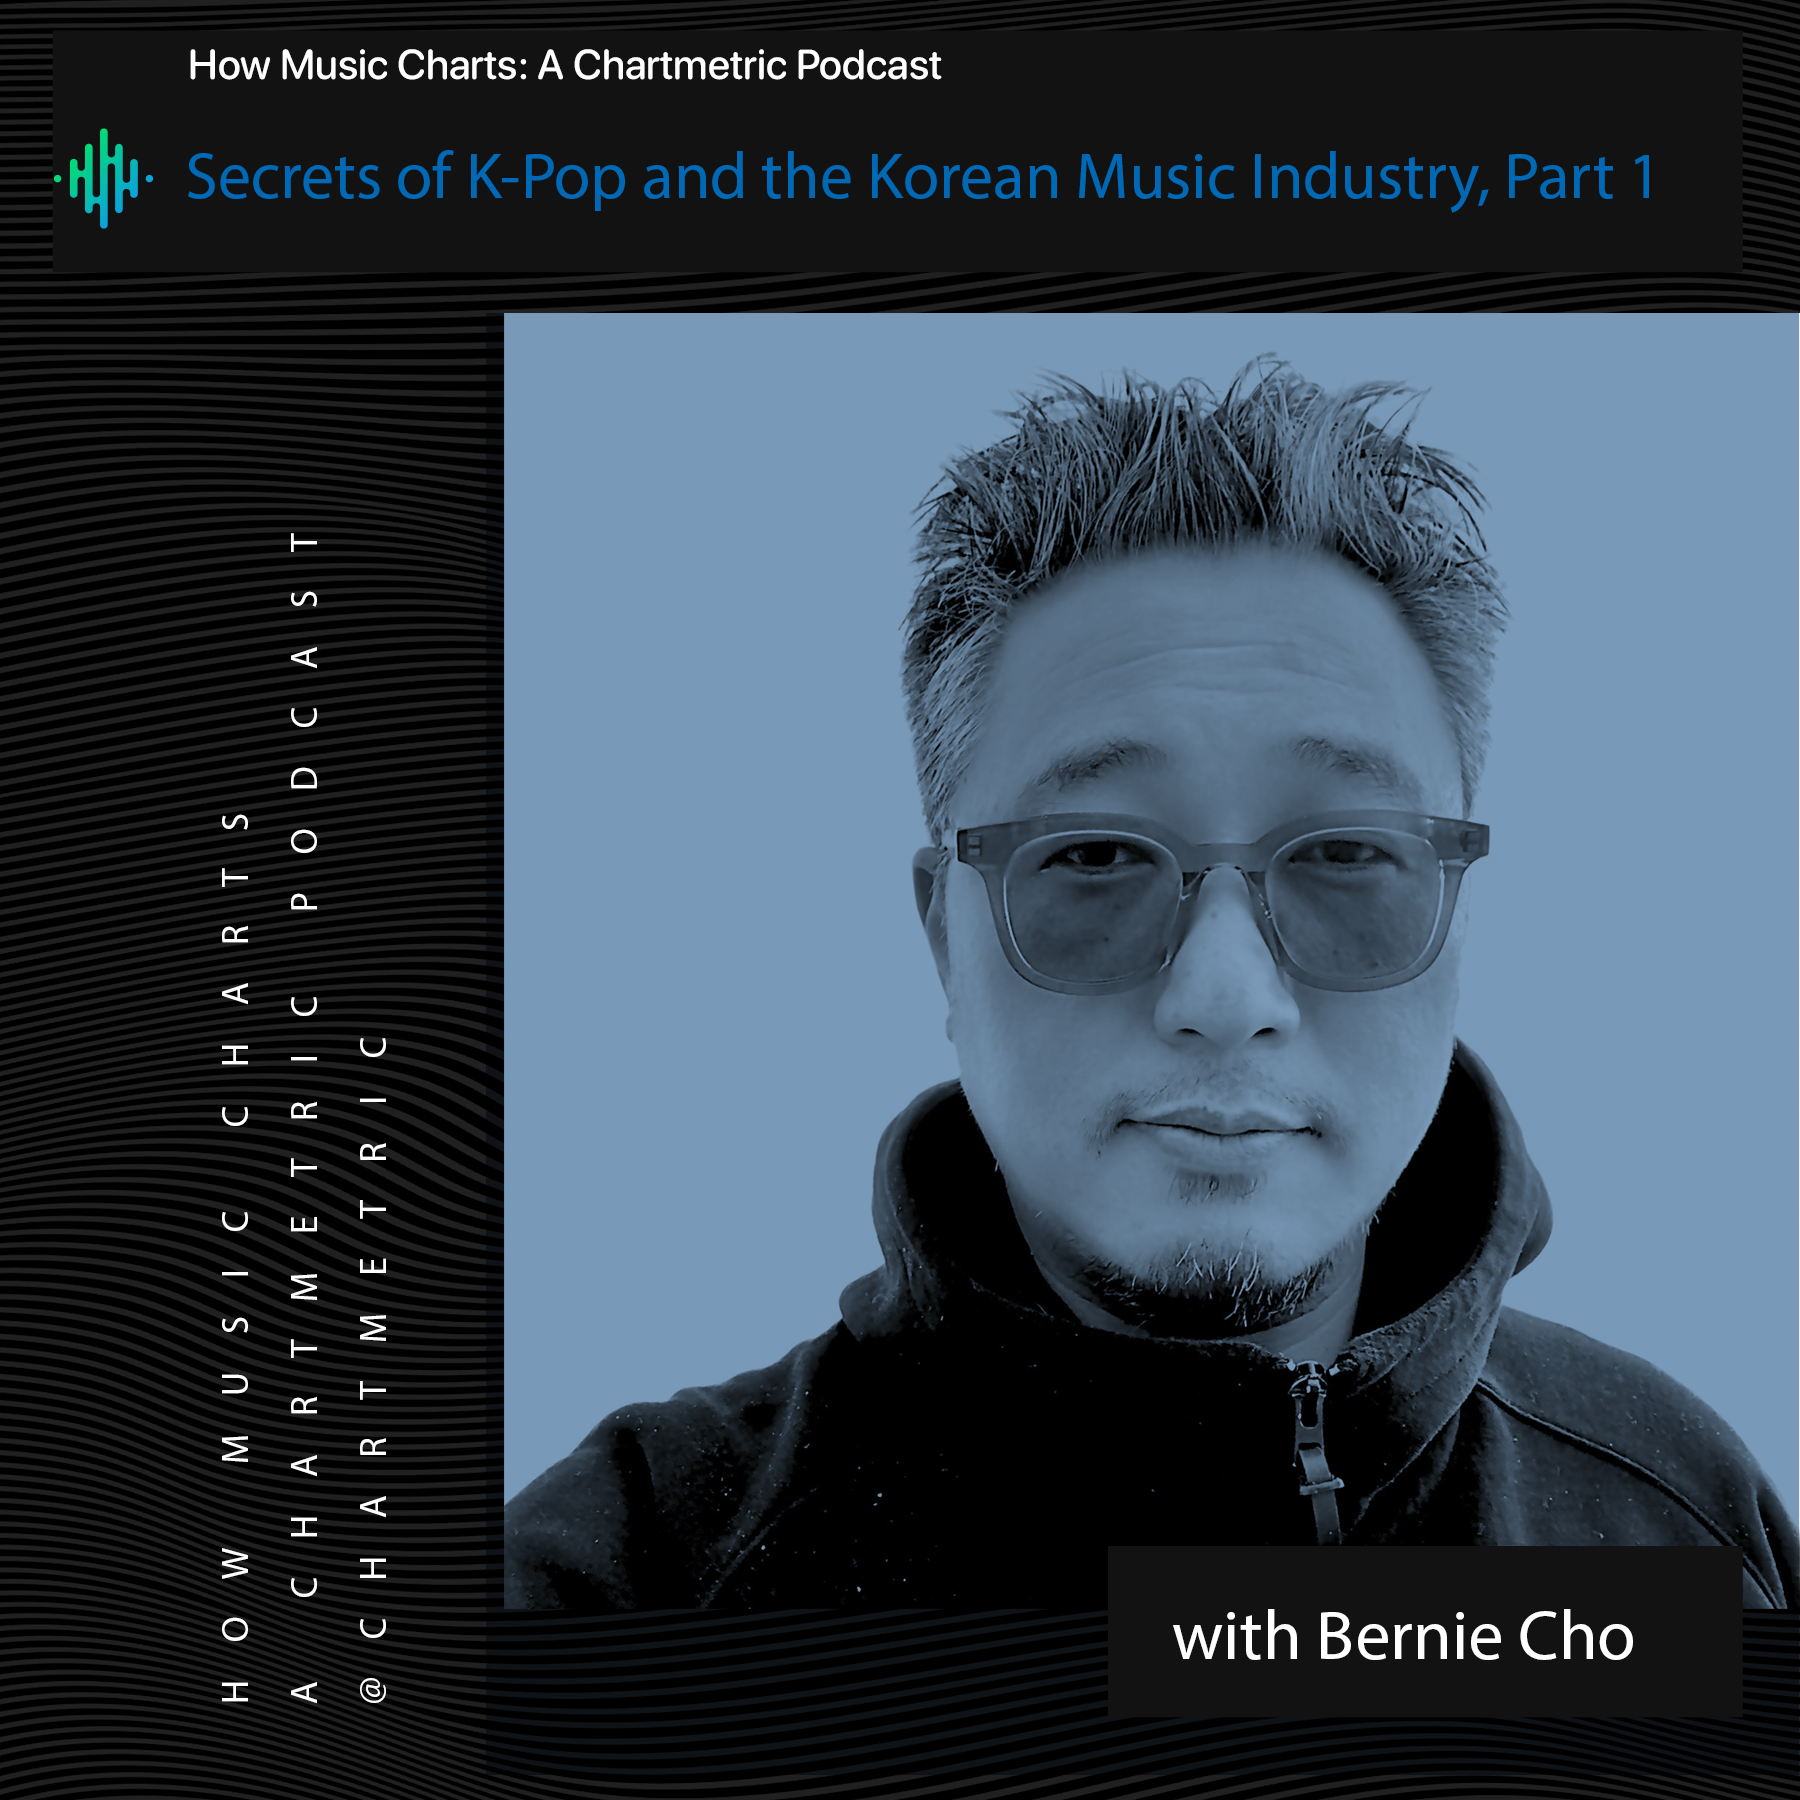 Secrets of K-Pop and the Korean Music Industry With Bernie Cho, Part 1